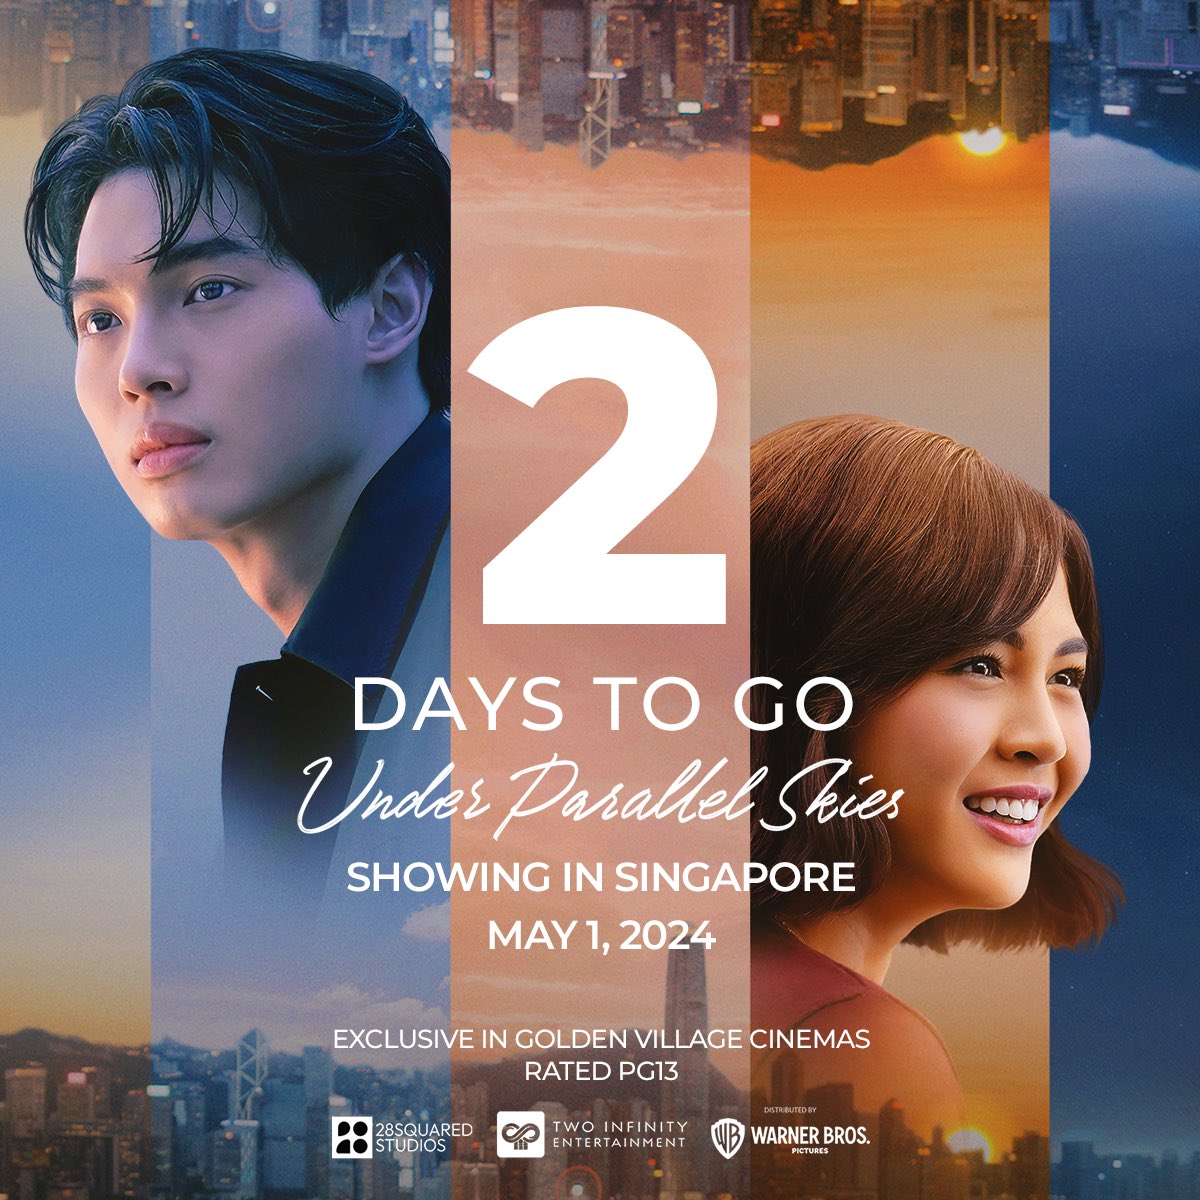 Fai lok is coming your way with only 2 days to go, #Singapore!

Catch #WinMetawin and #JanellaSalvador in one of the most anticipated film collaborations of the year in Asia, #UnderParallelSkies, at cinemas near you:

Philippines - Now Showing on its 2nd week
Singapore - Starting…